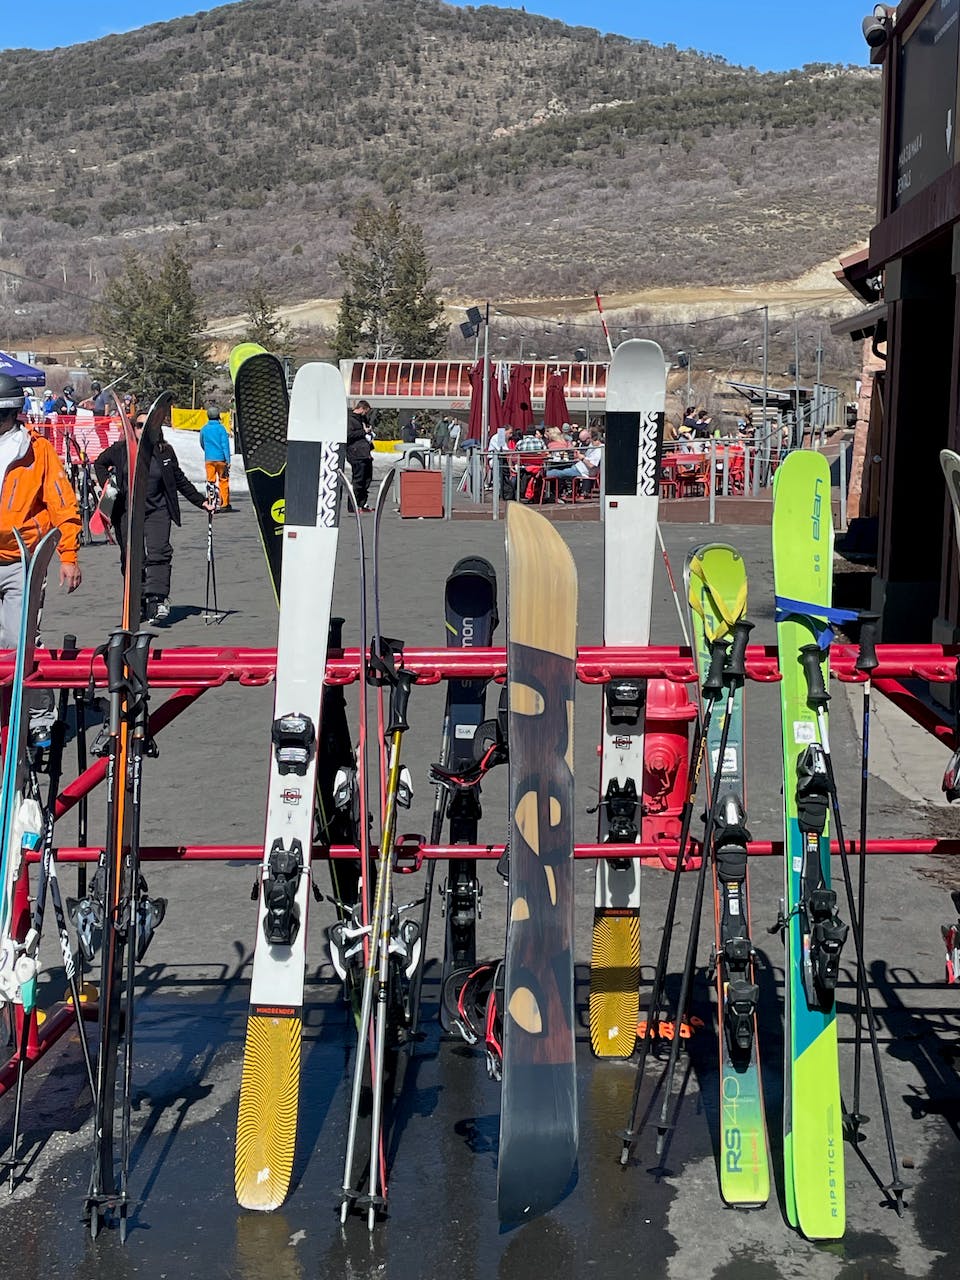 Several pairs of skis lined up on a ski rack in a parking lot.